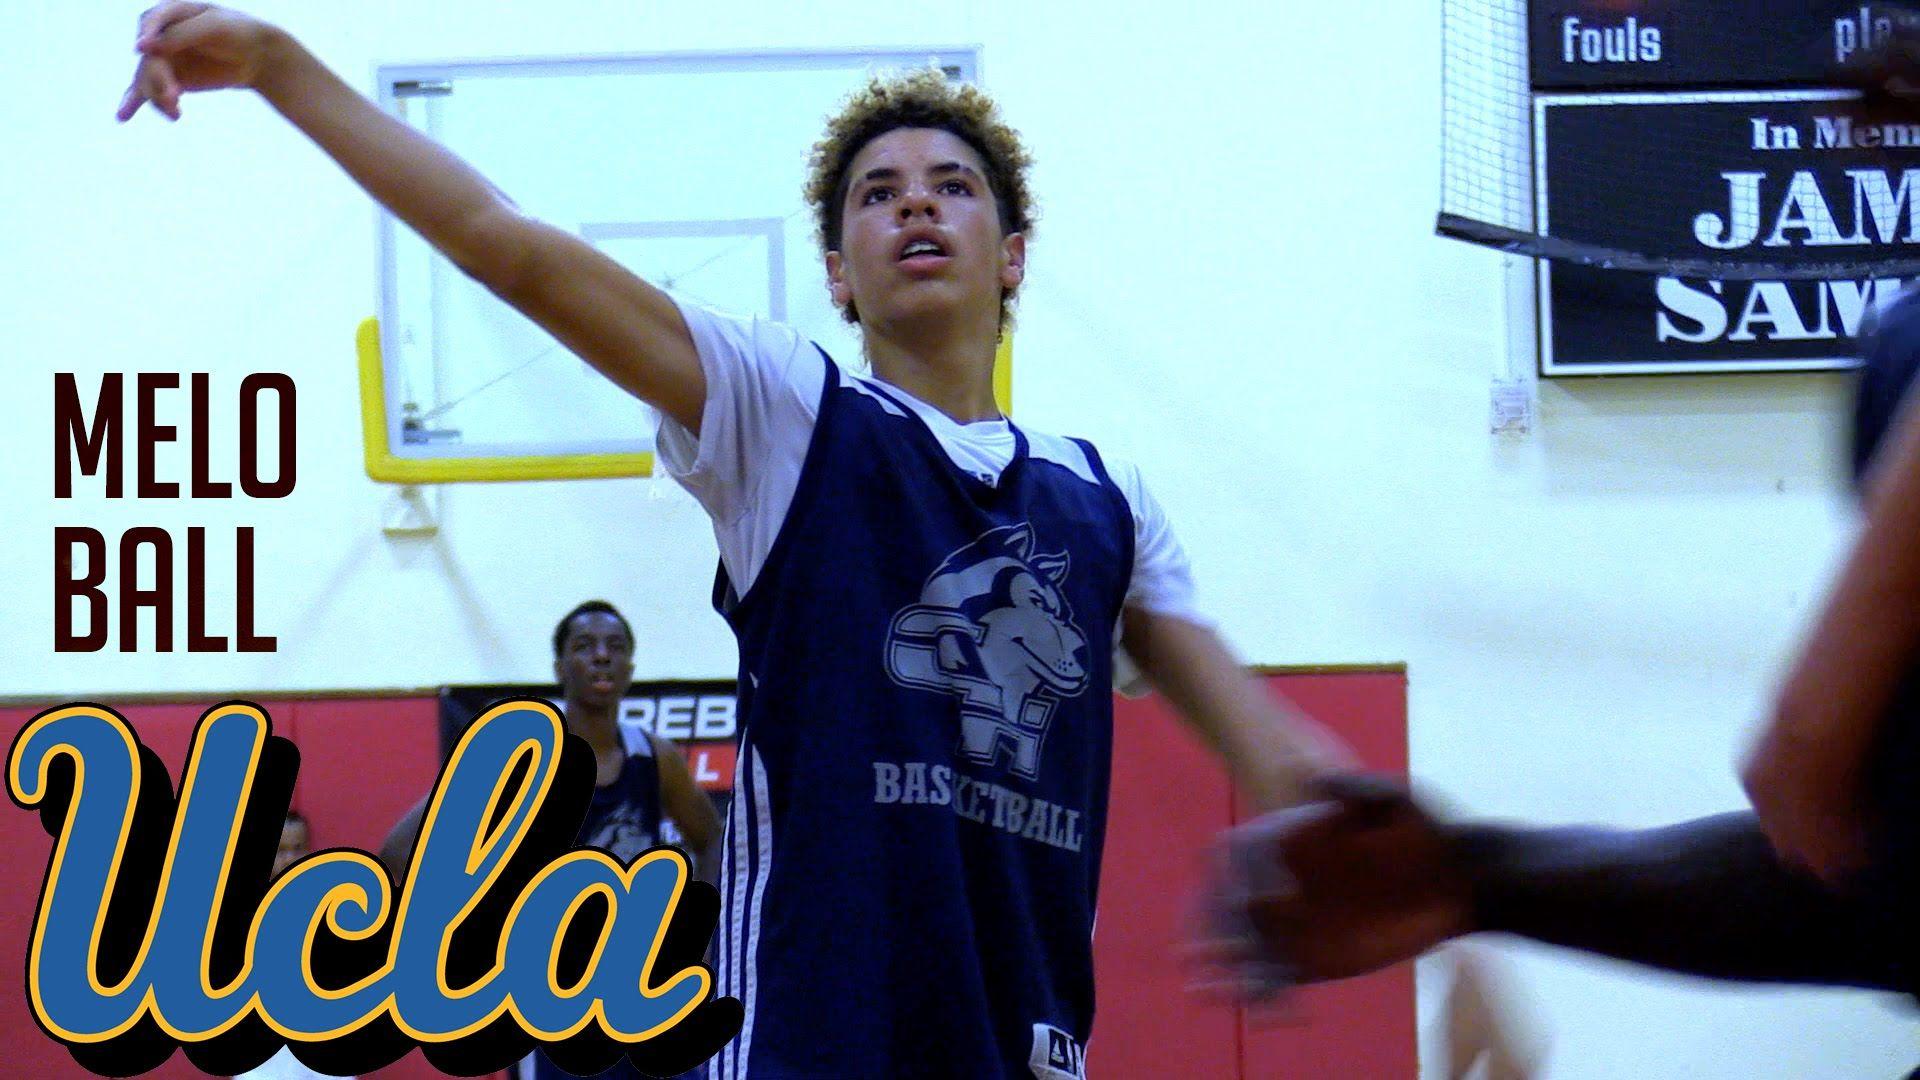 LaMelo Ball Full Summer 2016 Highlights. Youngest Ball Brother